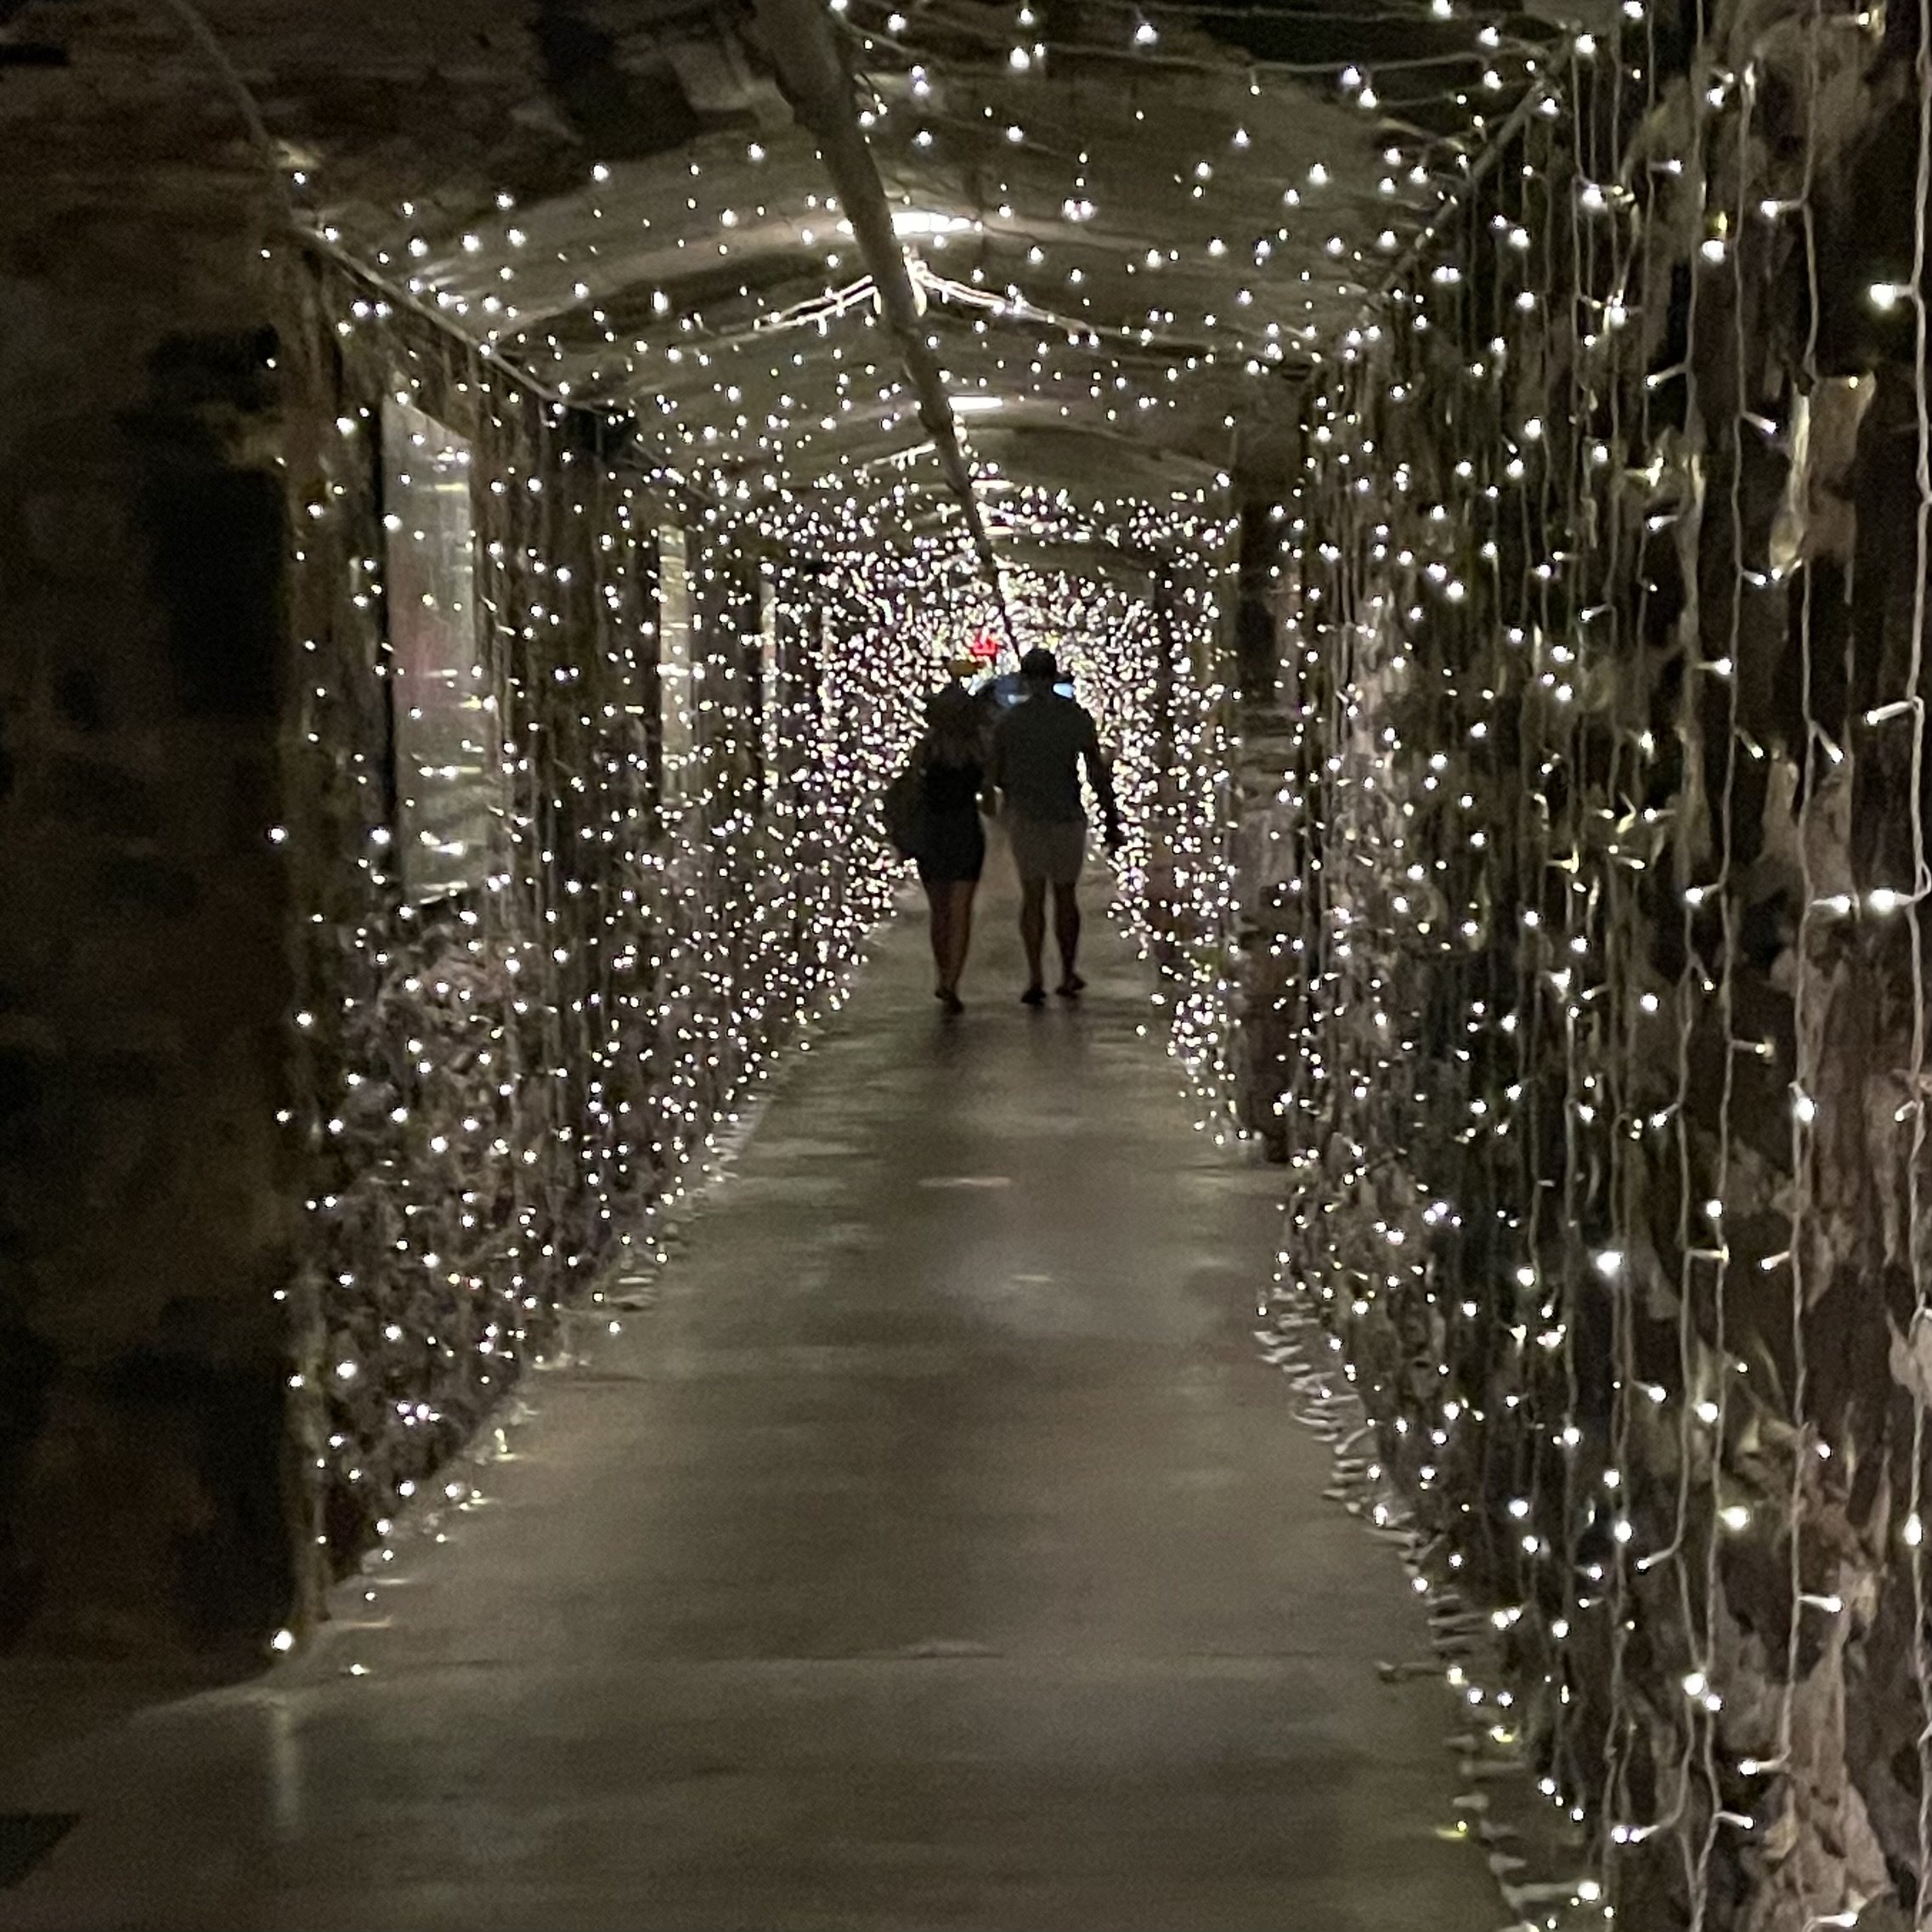 Biltmore winery tunnel with hanging lights.jpg